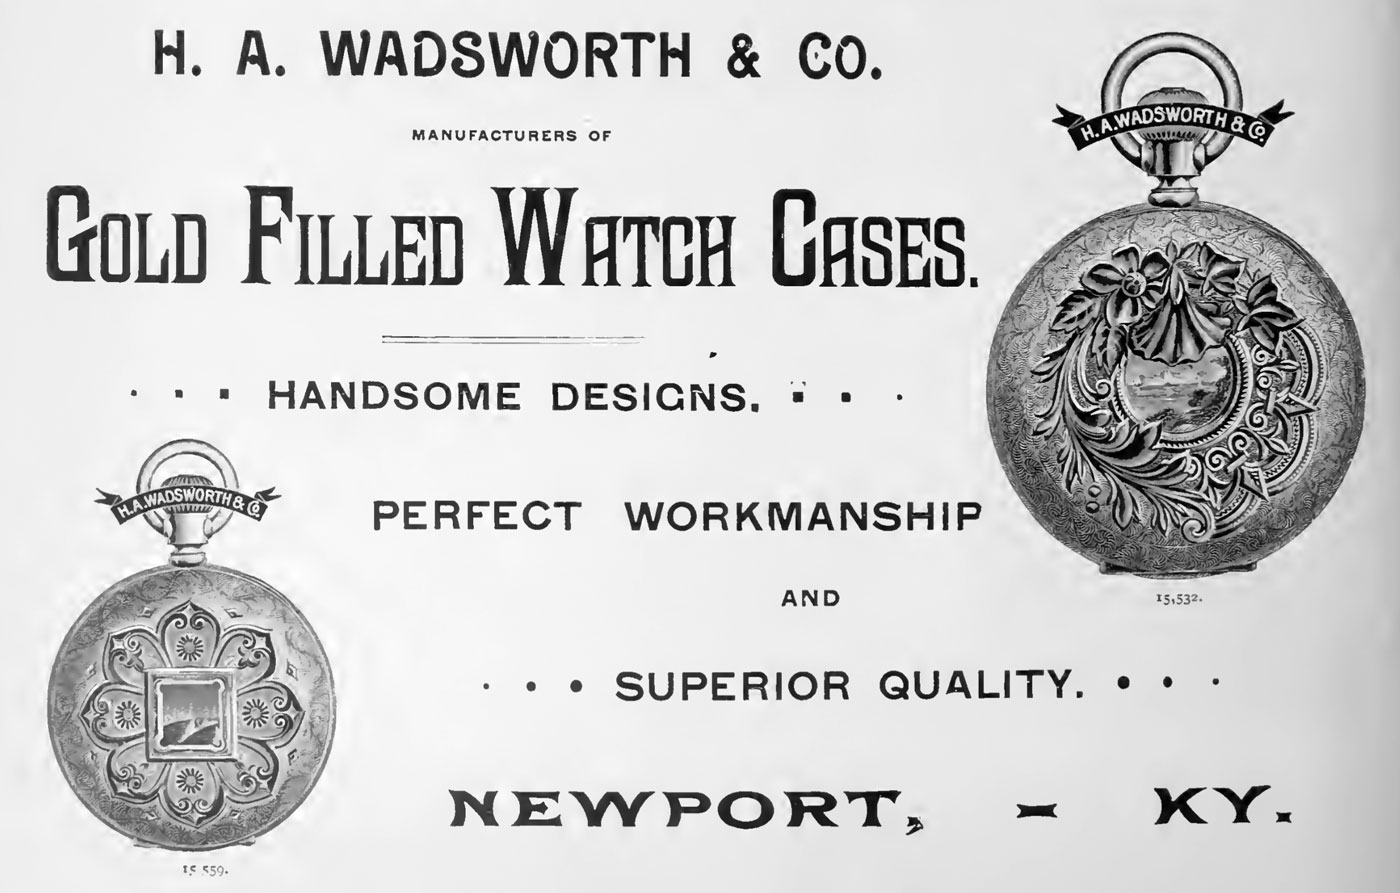 H.A. Wadsworth & Co. Image